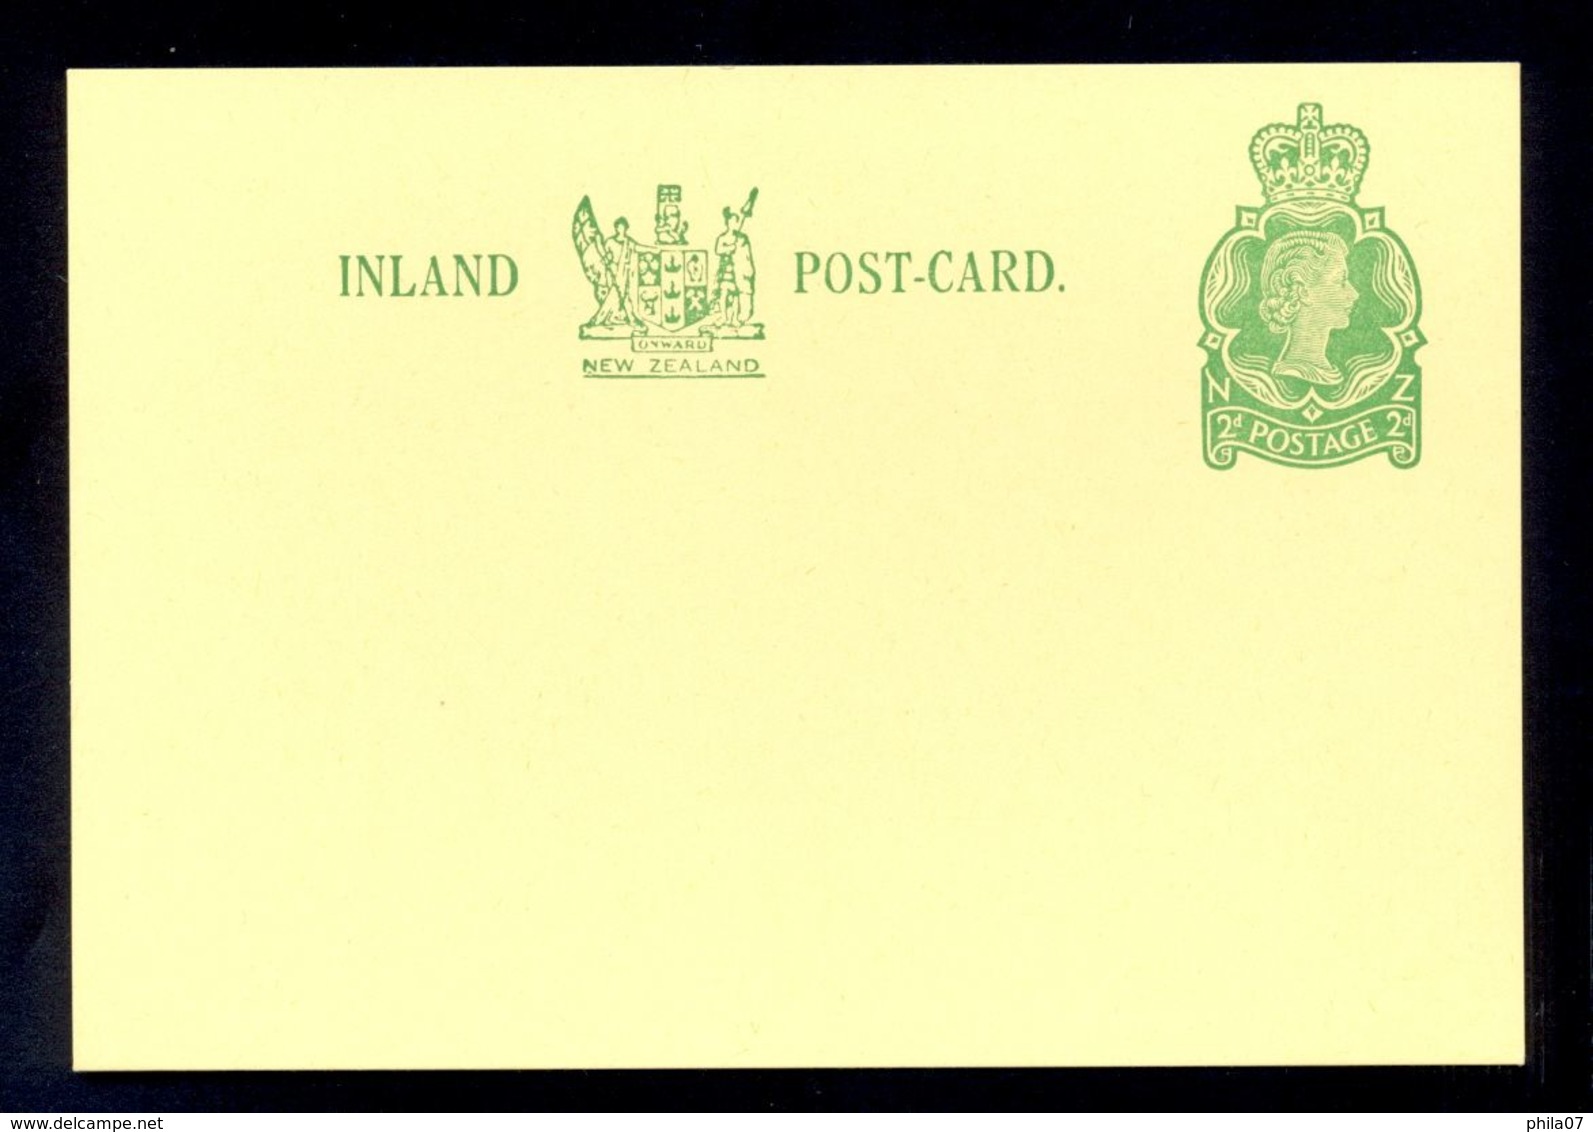 NEW ZEALAND - INLAND - Post-card With Imprinted Value, Not Traveled In Good Condition. - Interi Postali